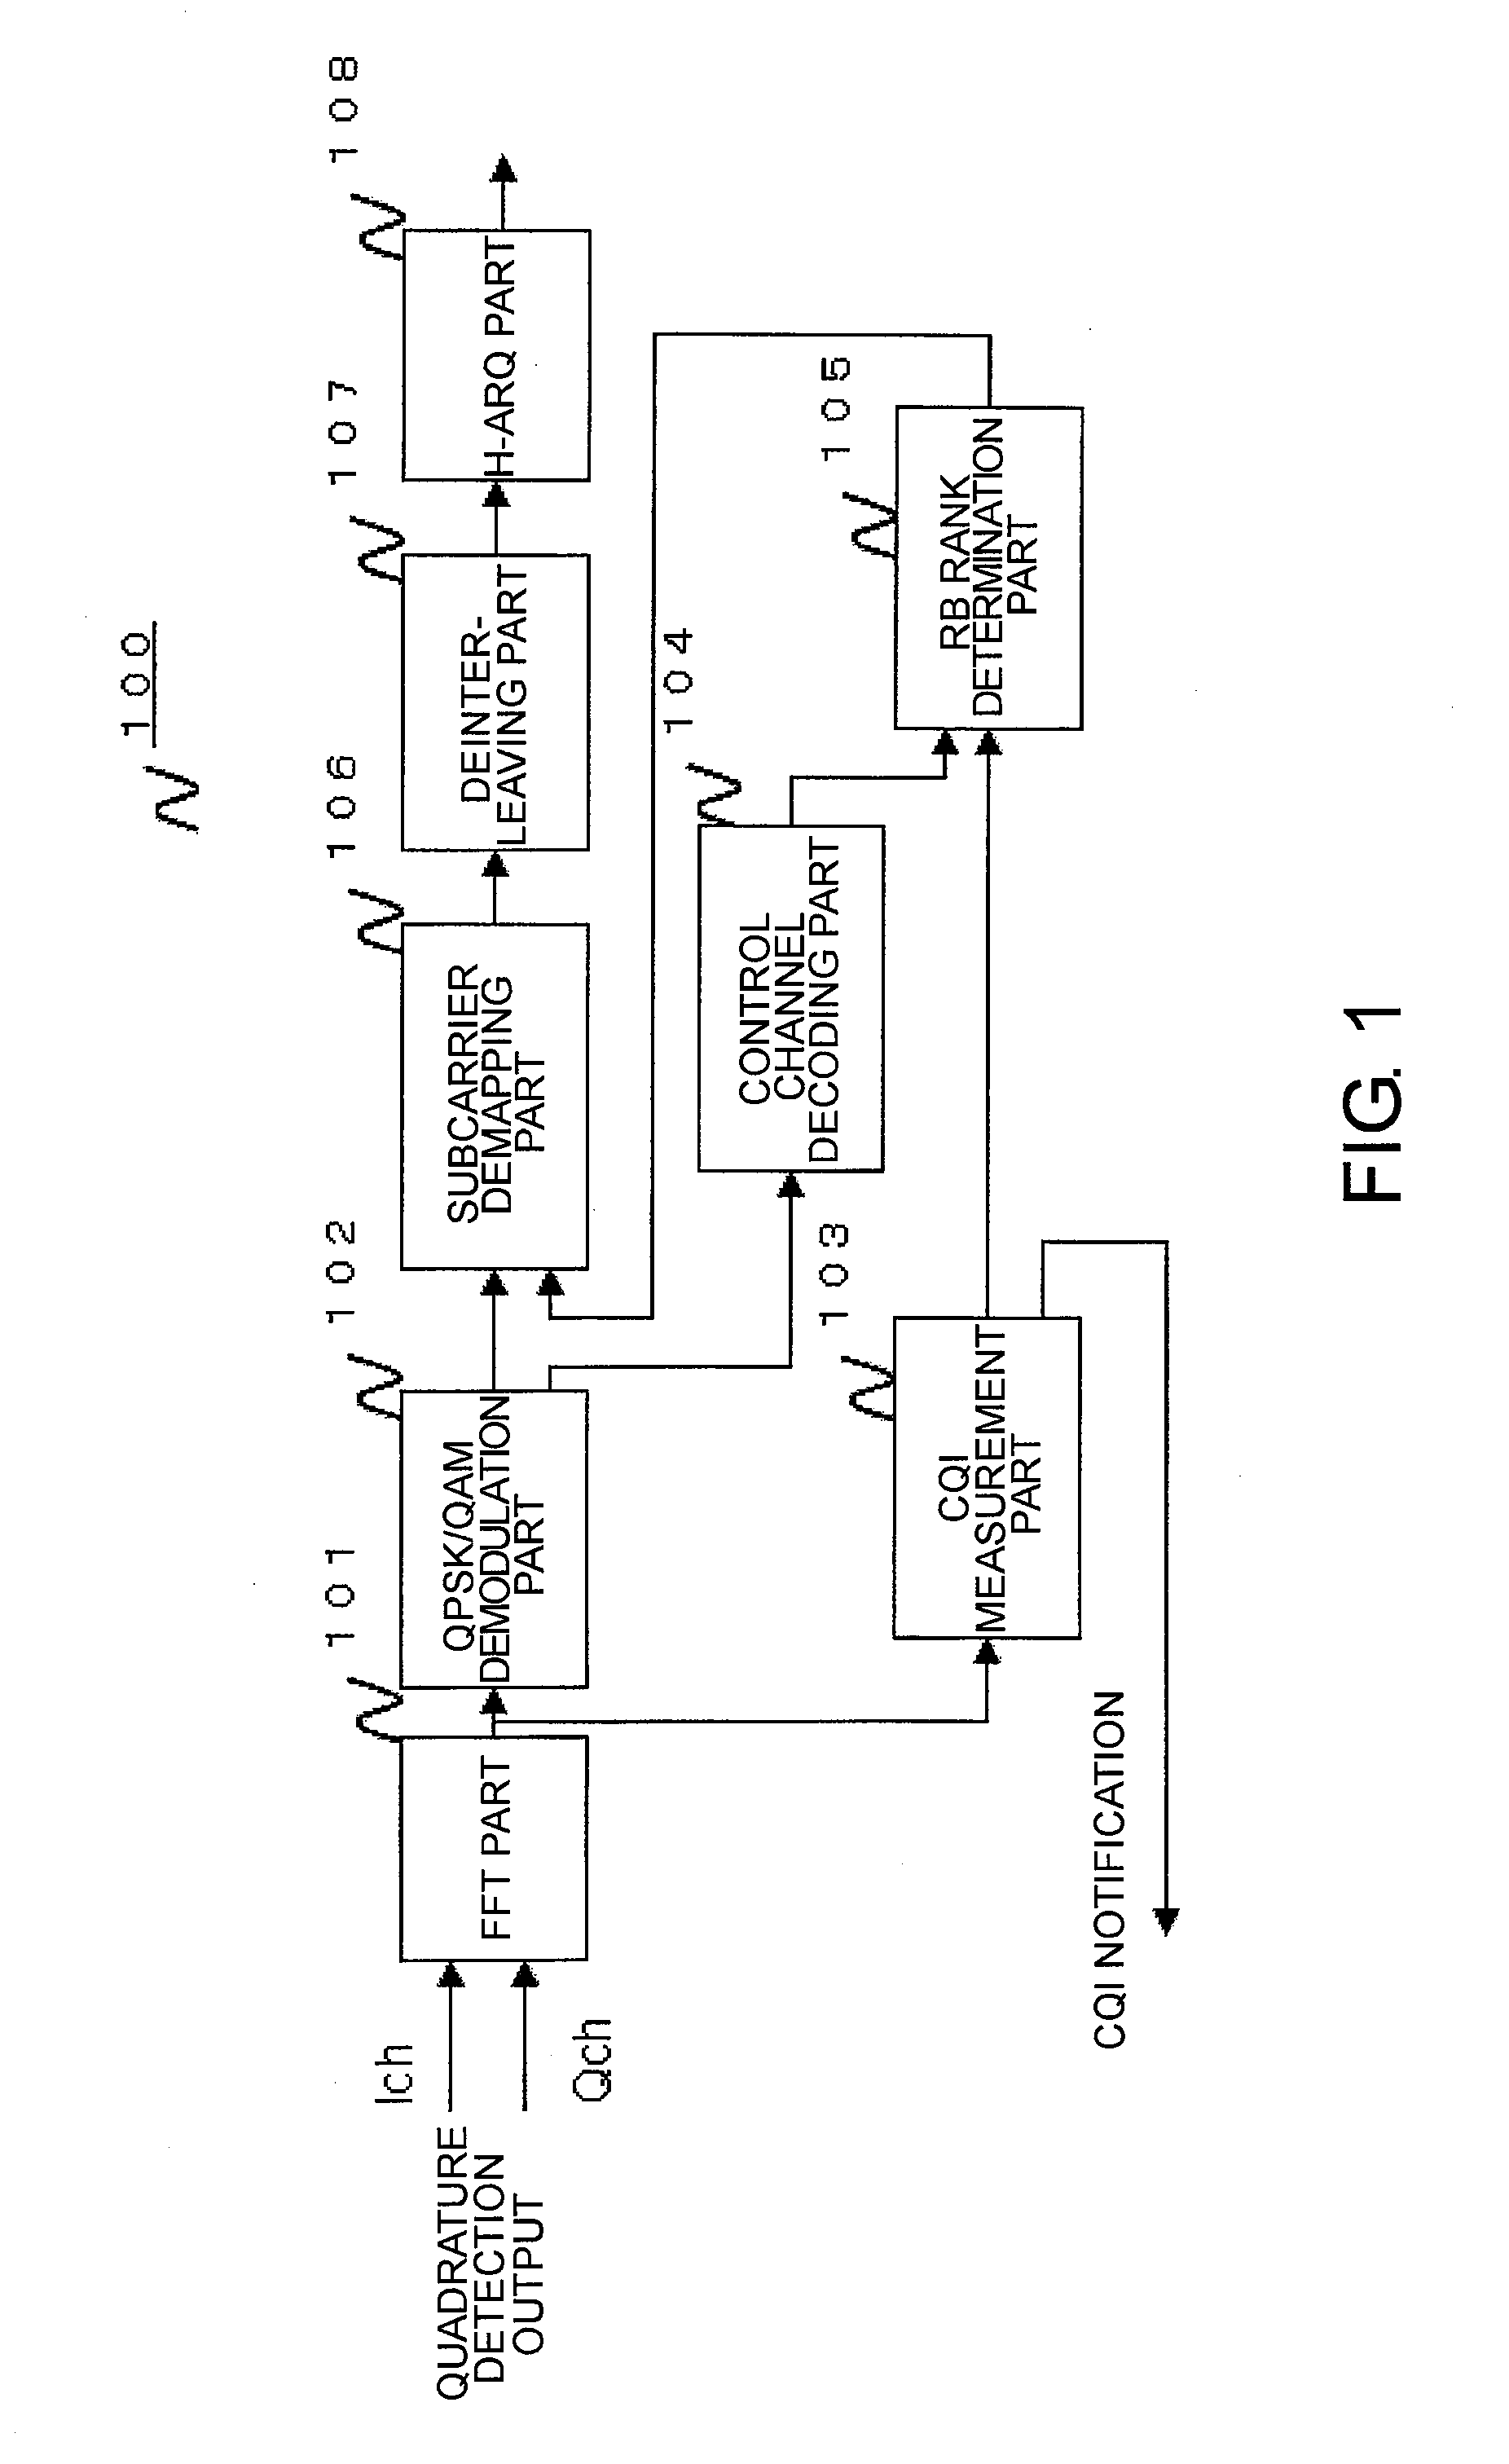 Base station, mobile station, and mapping method of subcarriers